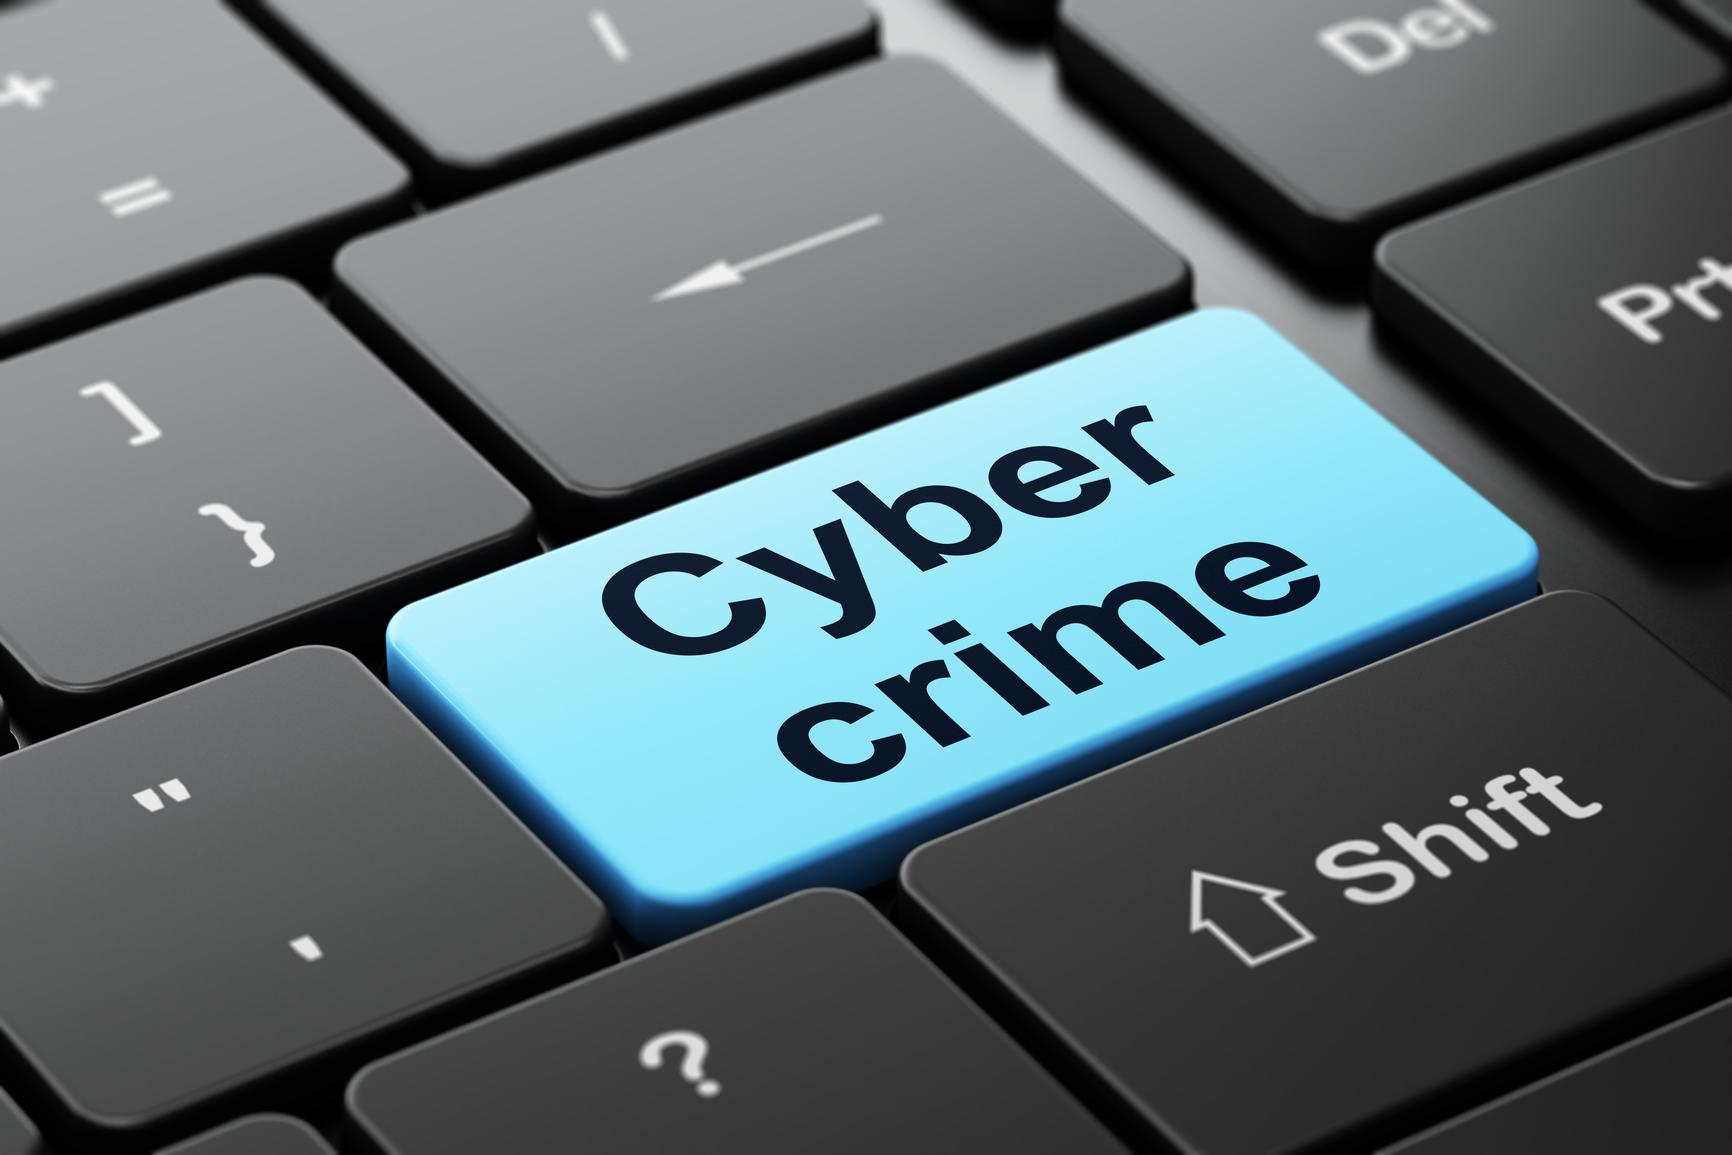 Cybercrime: working better and more closely together - YouthEPP